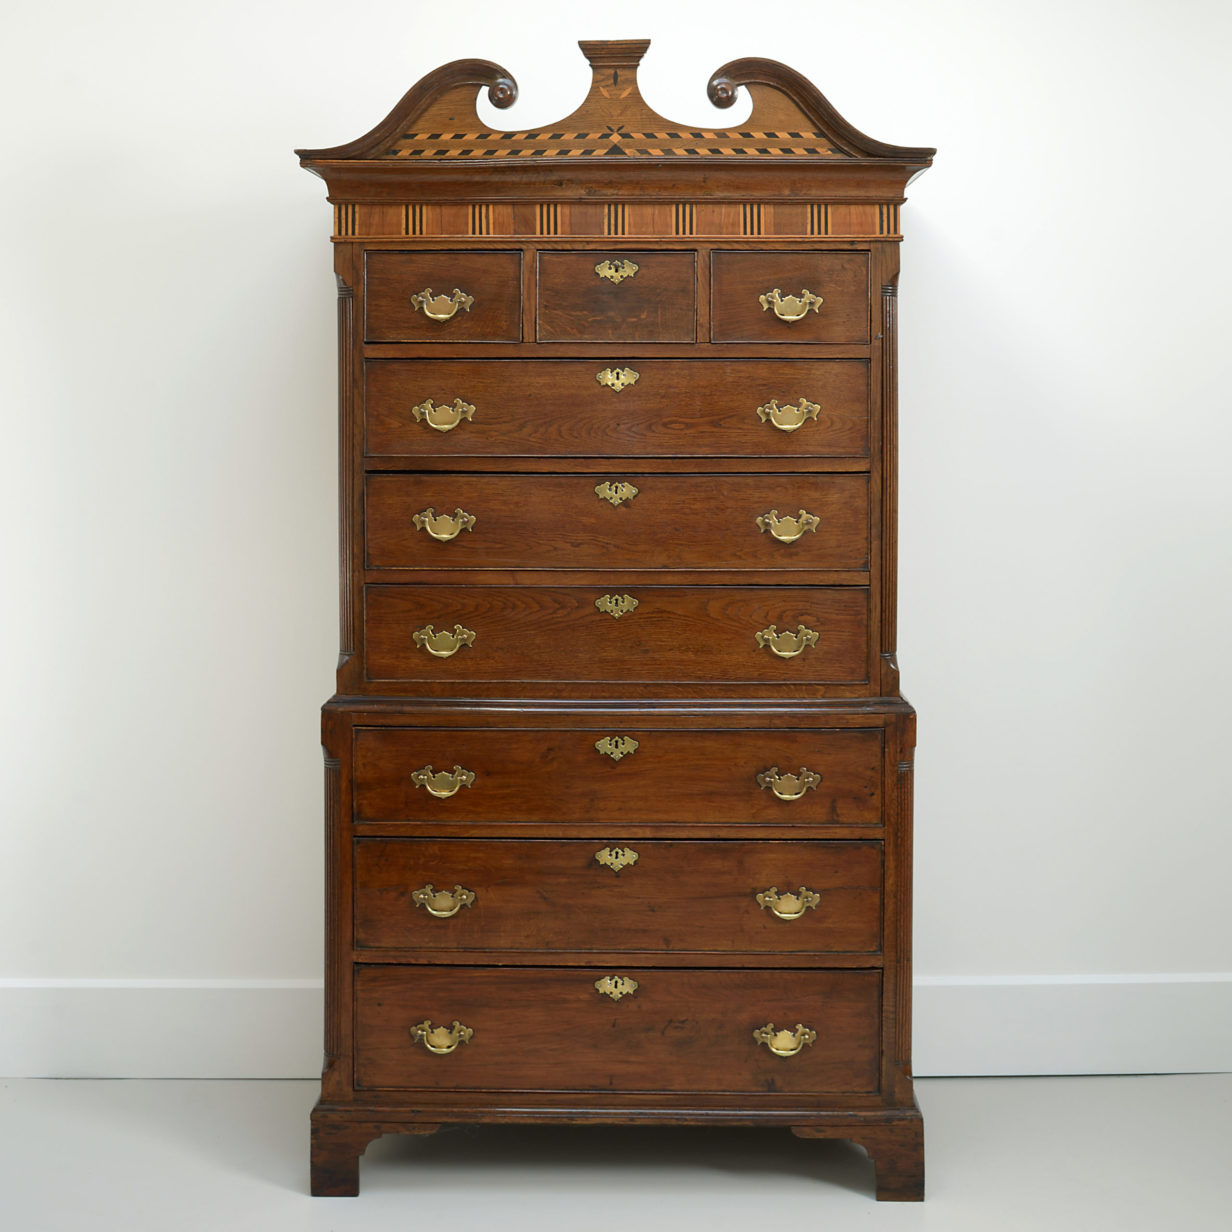 Oak chest on stand